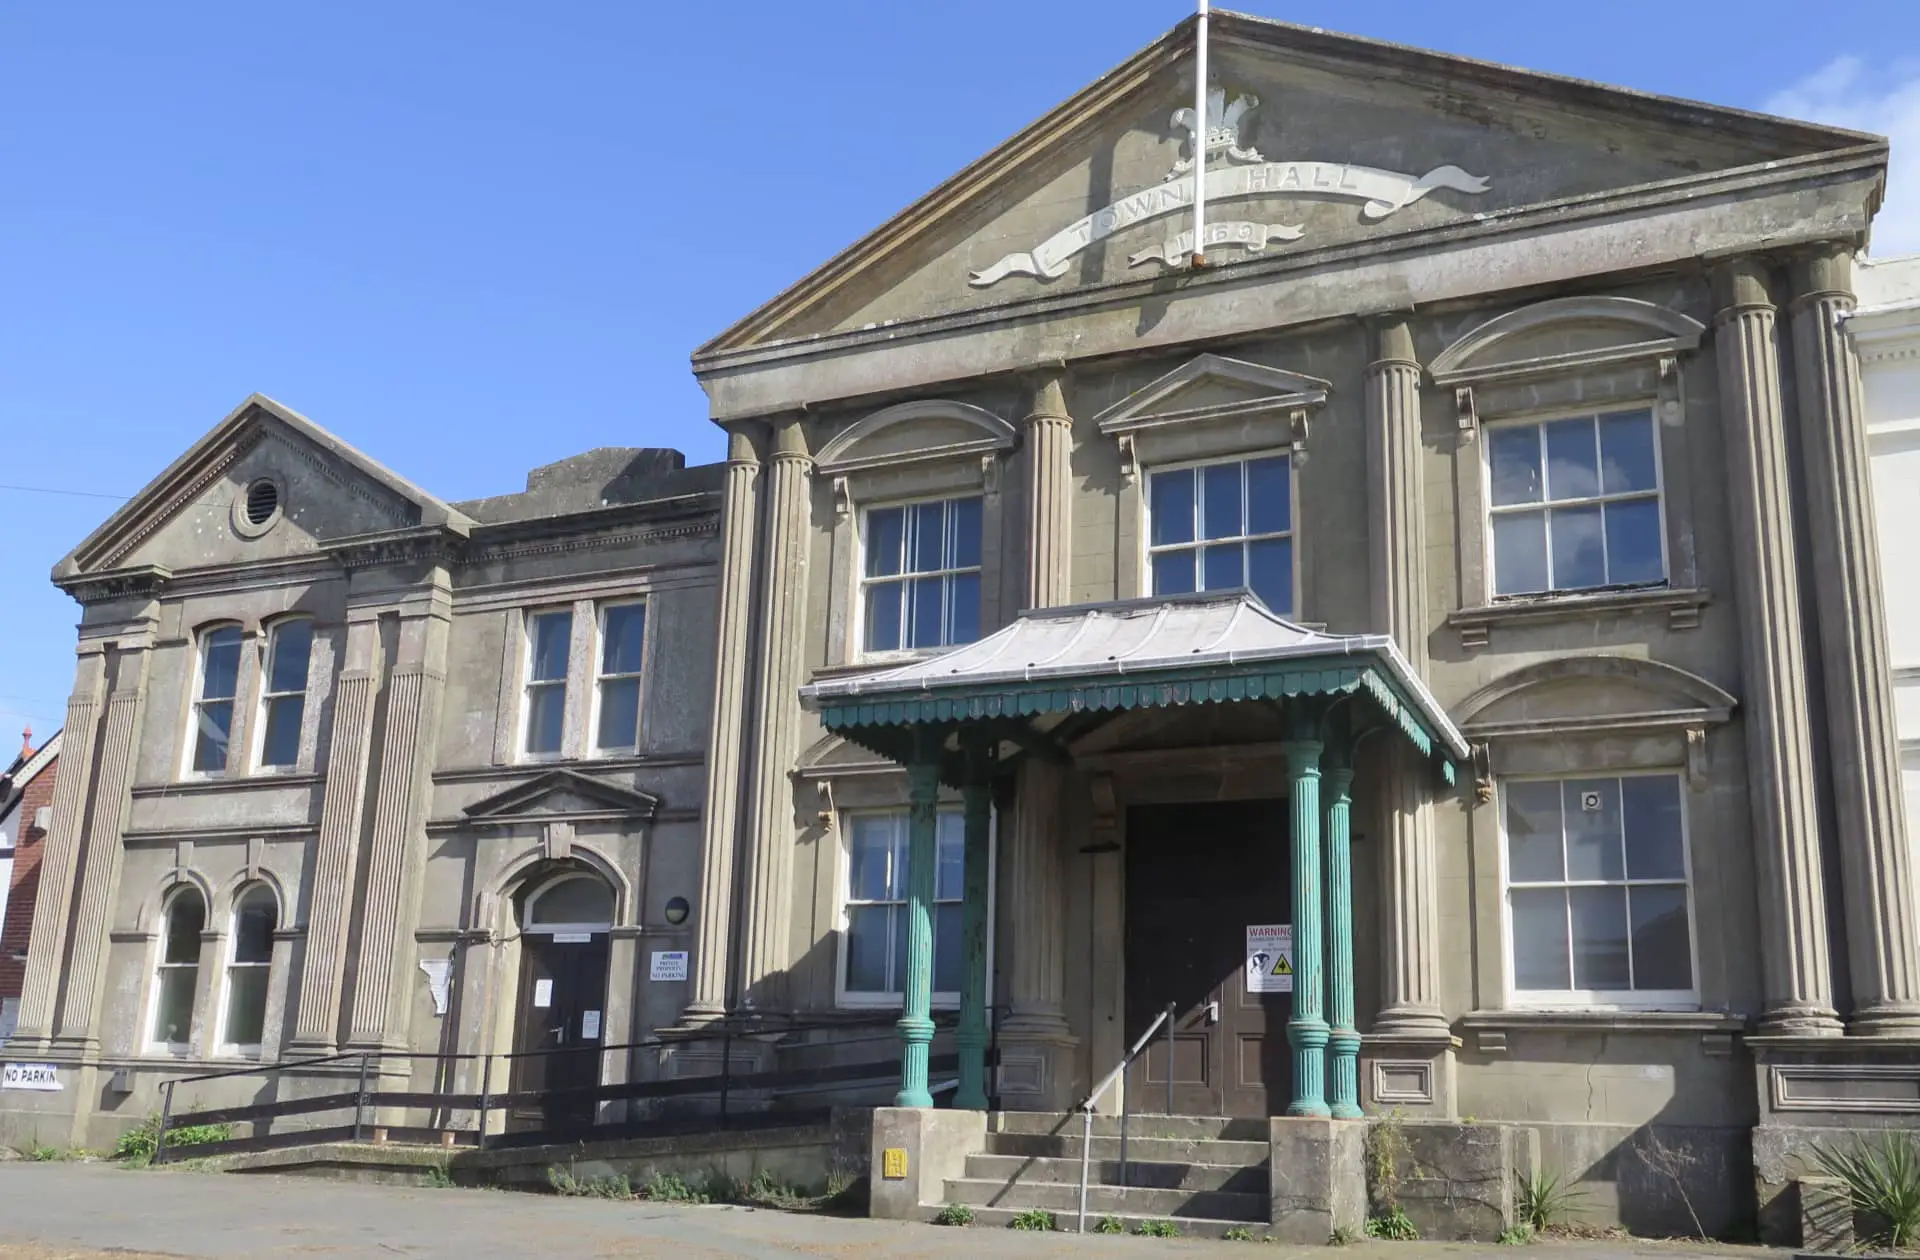 Sandown Town hall exterior (by Paul Coueslant, 25 March 2019)